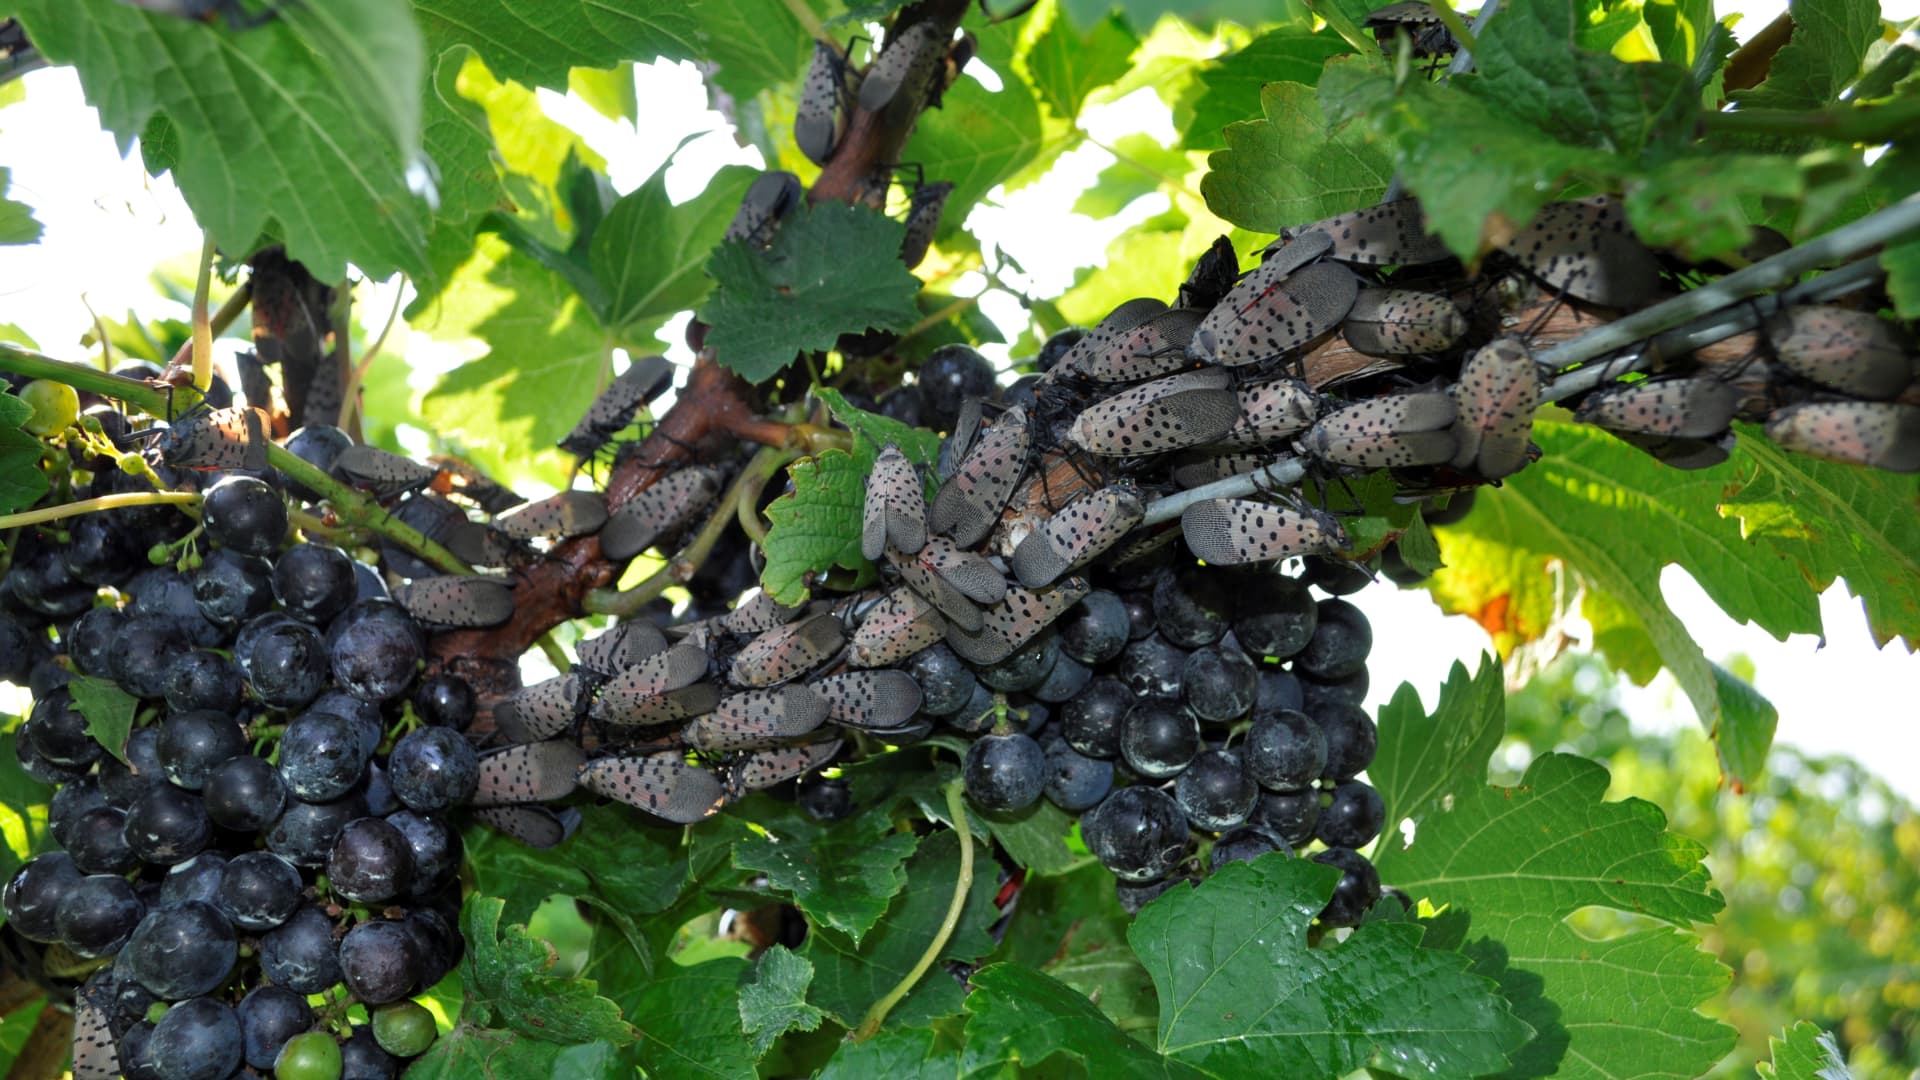 Spotted lanternflies feast on grapevines, put vineyards at risk